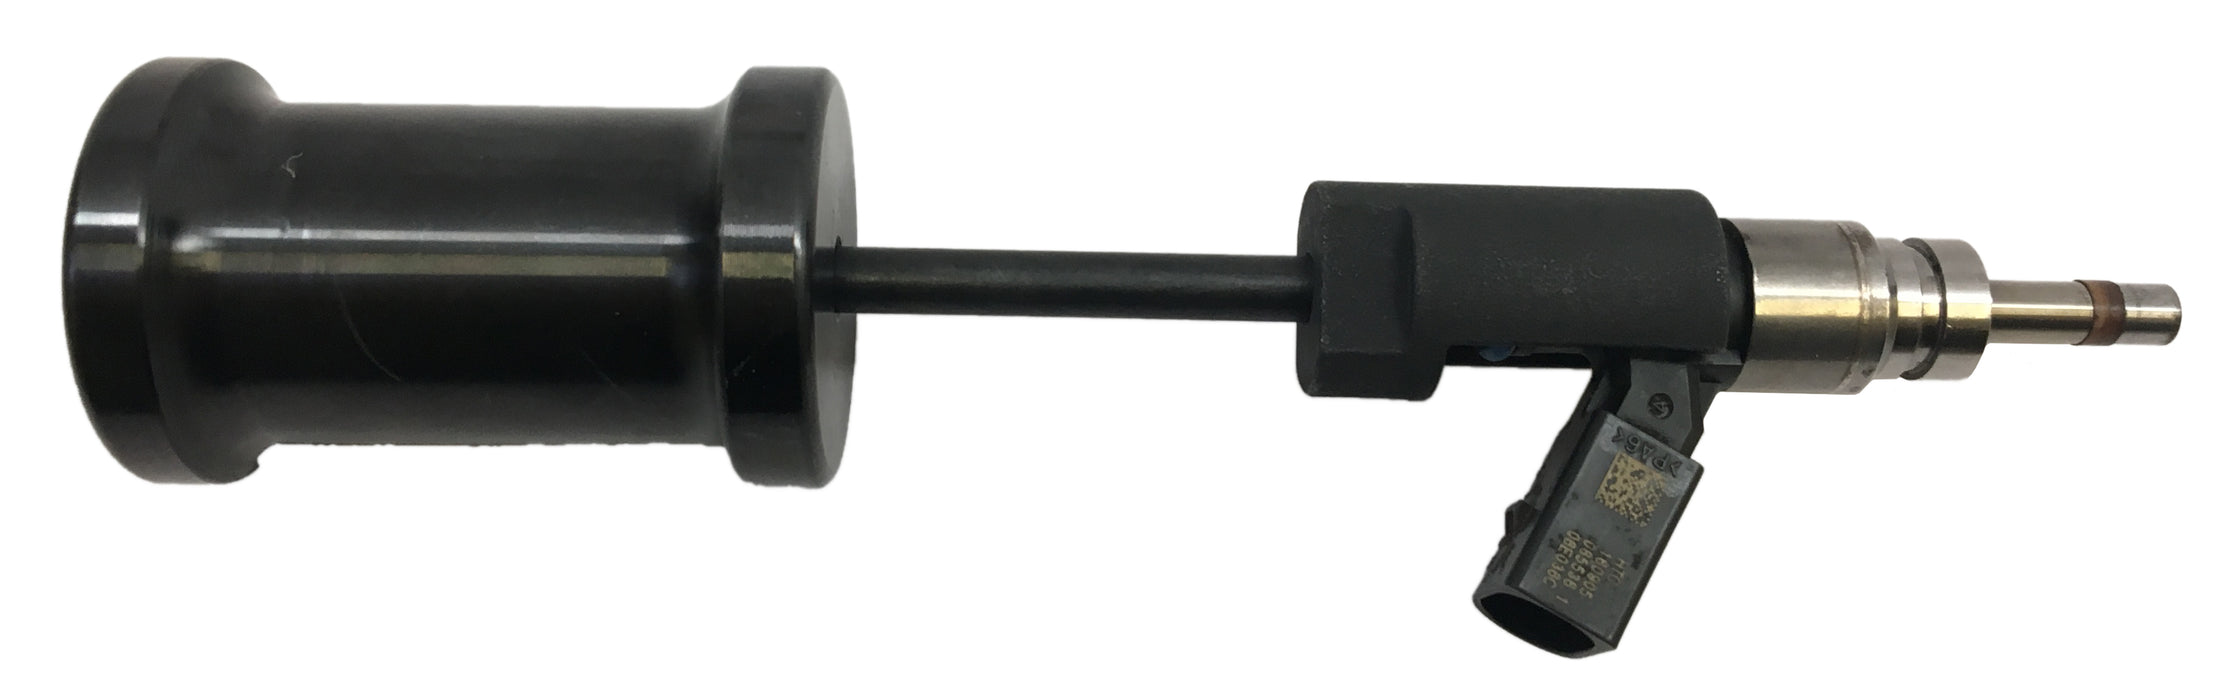 8877 - VW / Audi  Fuel Injector Puller / Remover